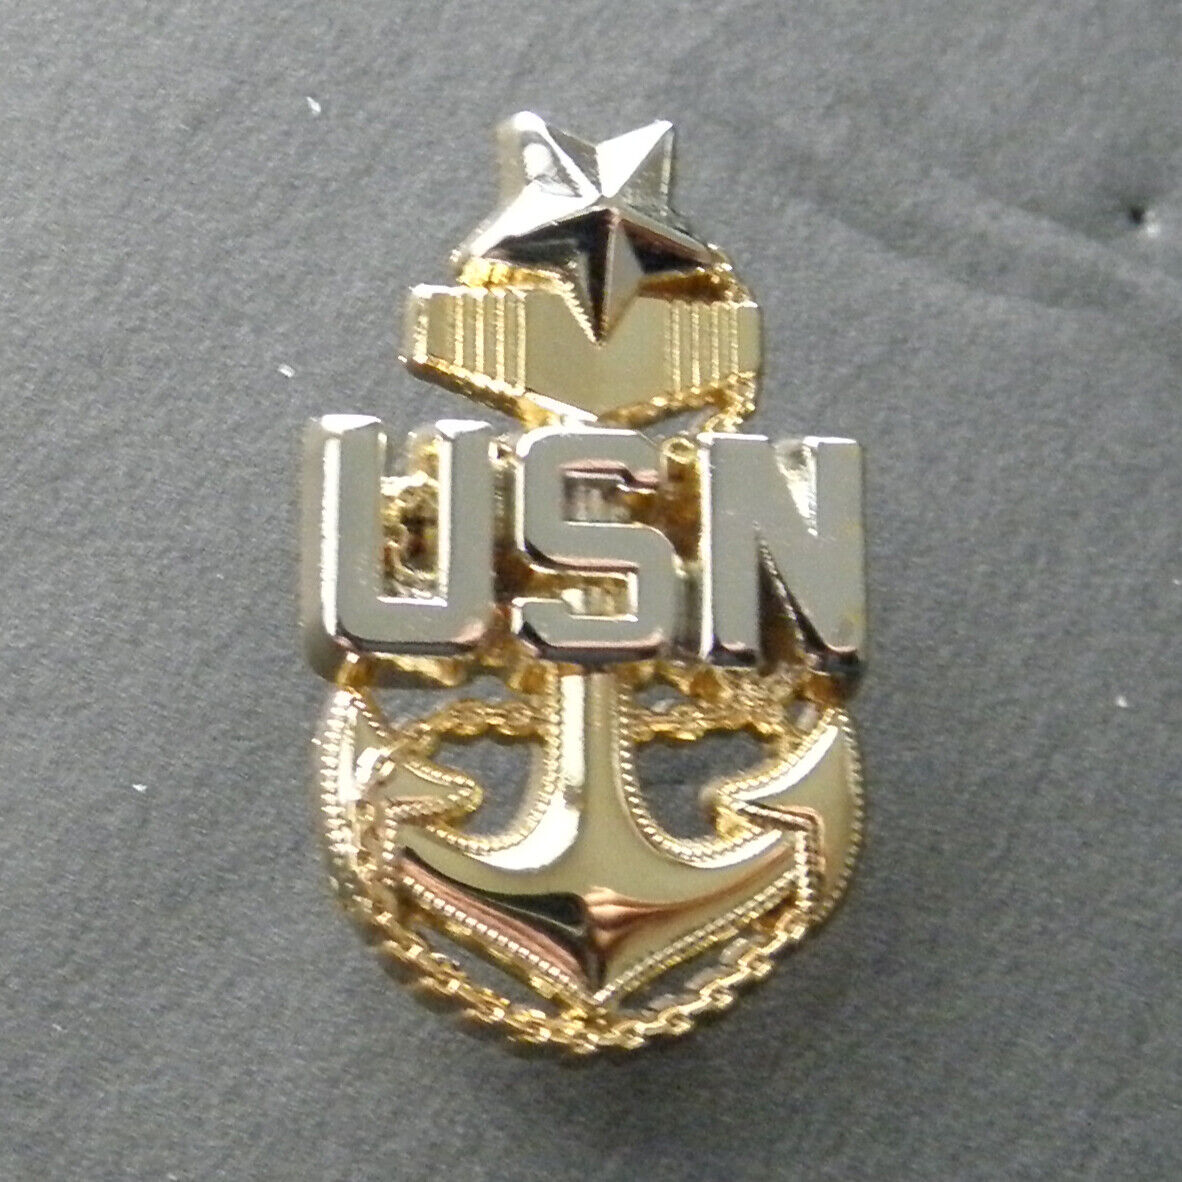 NAVY CHIEF SENIOR PETTY OFFICER ANCHOR PIN BADGE 1.1 INCHES